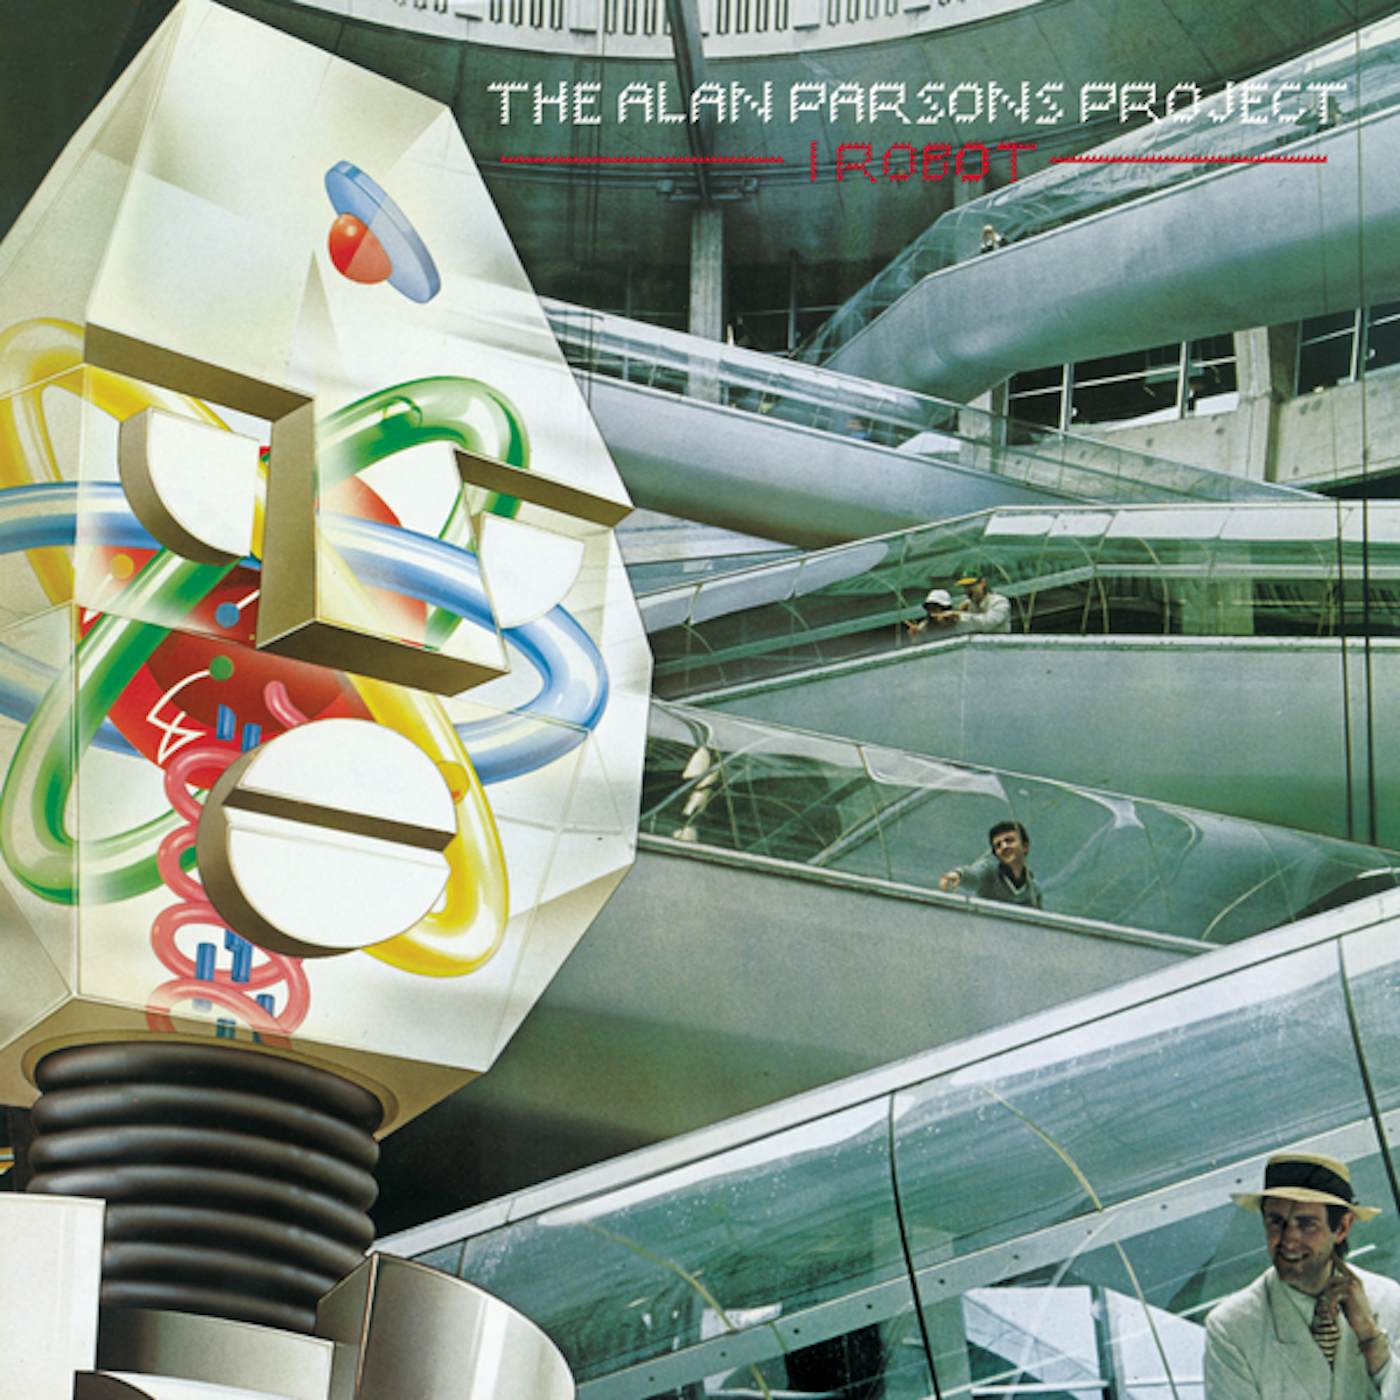 The Alan Parsons Project I ROBOT (ANNIVERSARY EDITION) CD